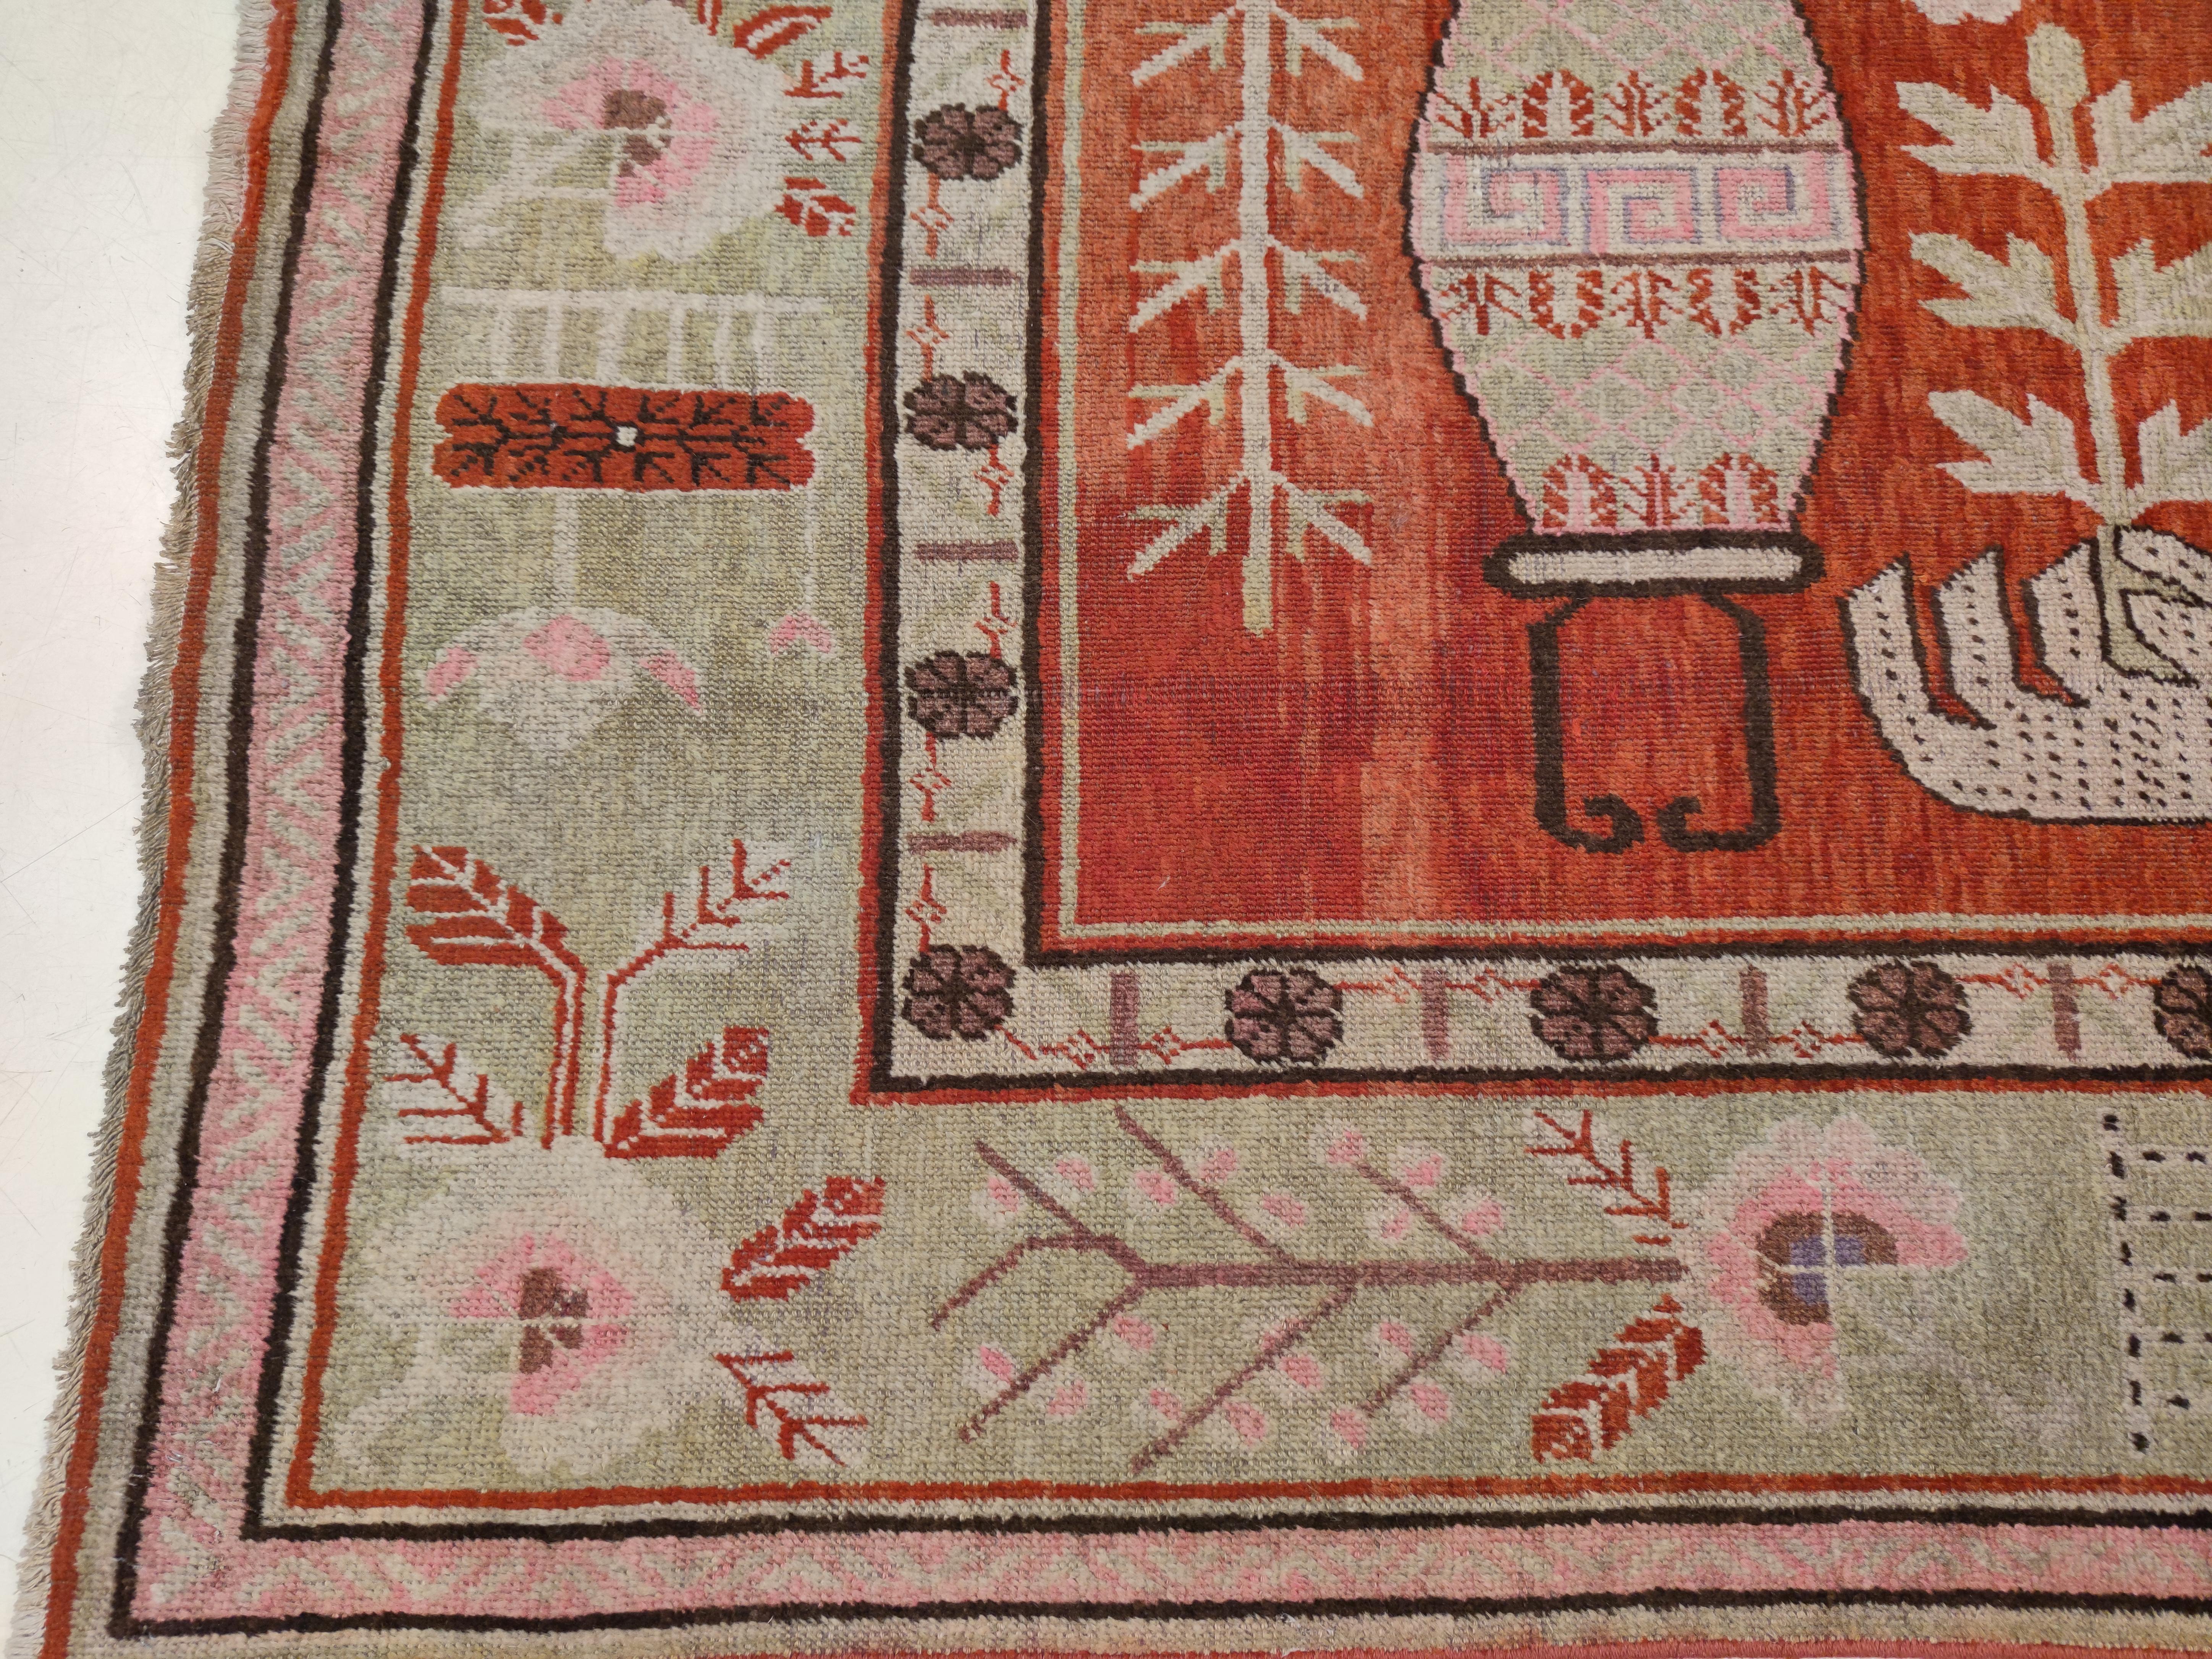 Woven during the Art Deco period, rugs of this type were commissioned by the nobility and the high ranking officers inhabiting the Tarim Basin in eastern Turkestan, which is the heartland of the oasis of Khotan, Yarkand and Kashgar. The rugs of